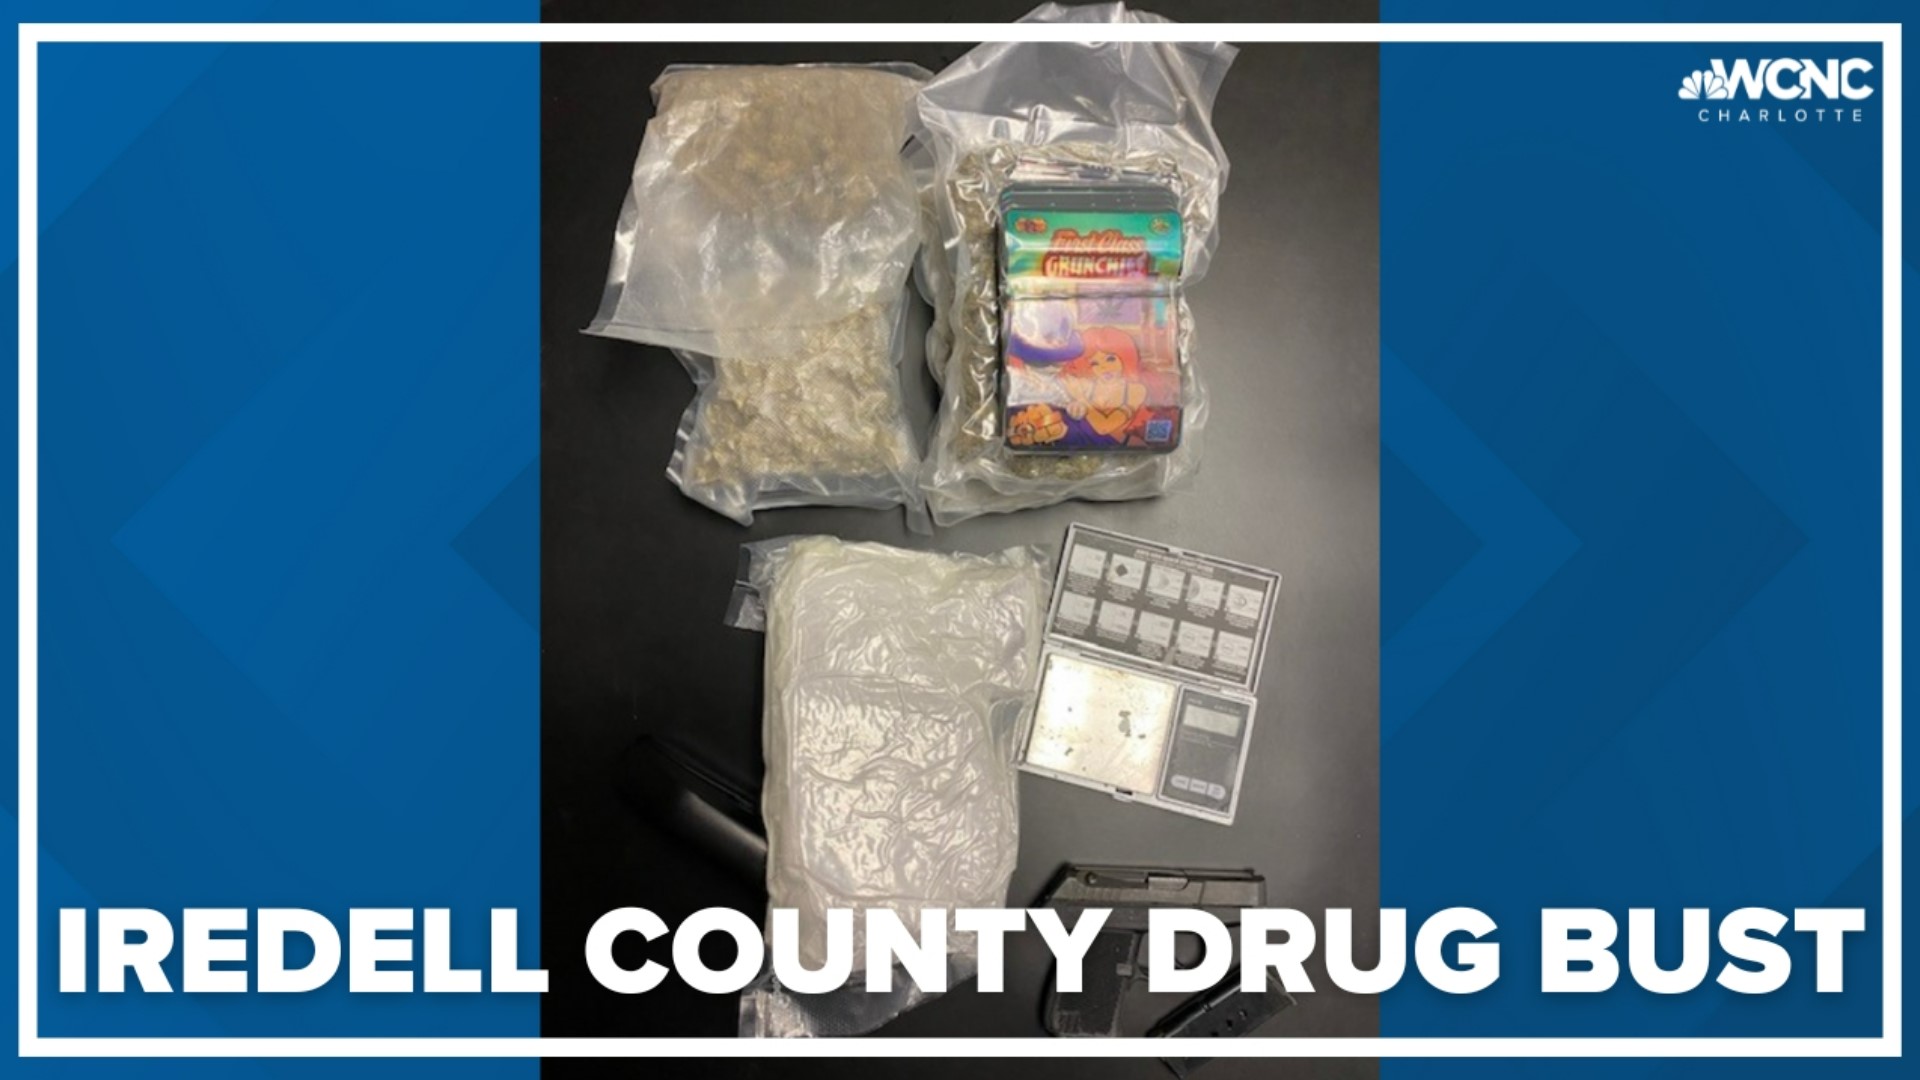 Sheriff Darren Campbell said the suspect had a brick of fentanyl that weighed more than a pound, and was worth about $125,000 on the street.